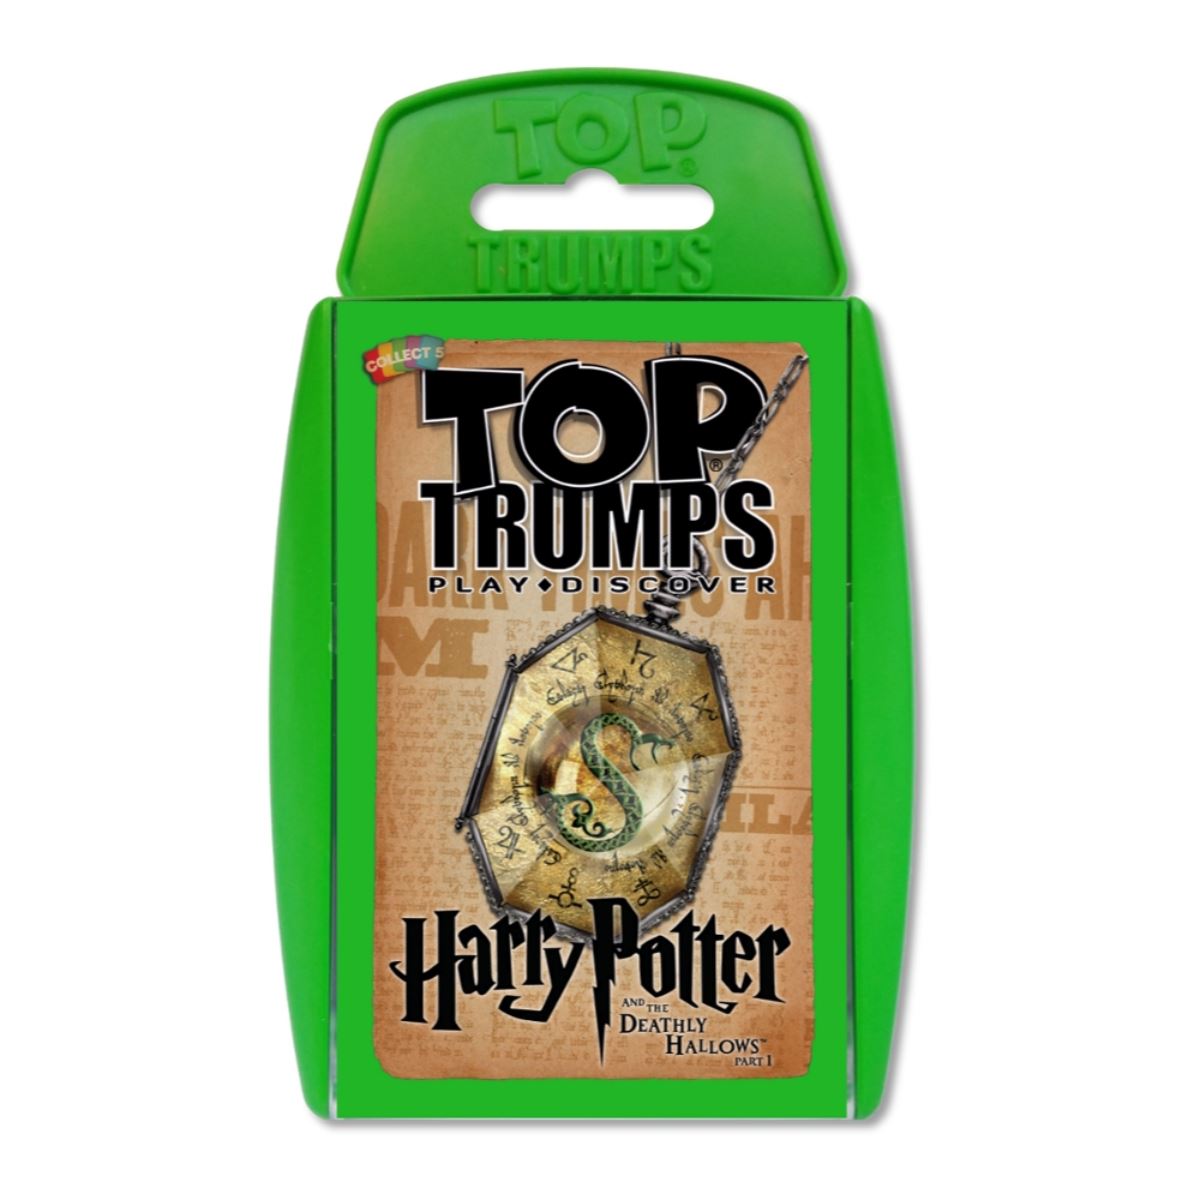 Harry Potter & The Deathly Hallows Pt 1 Top Trumps Card Game